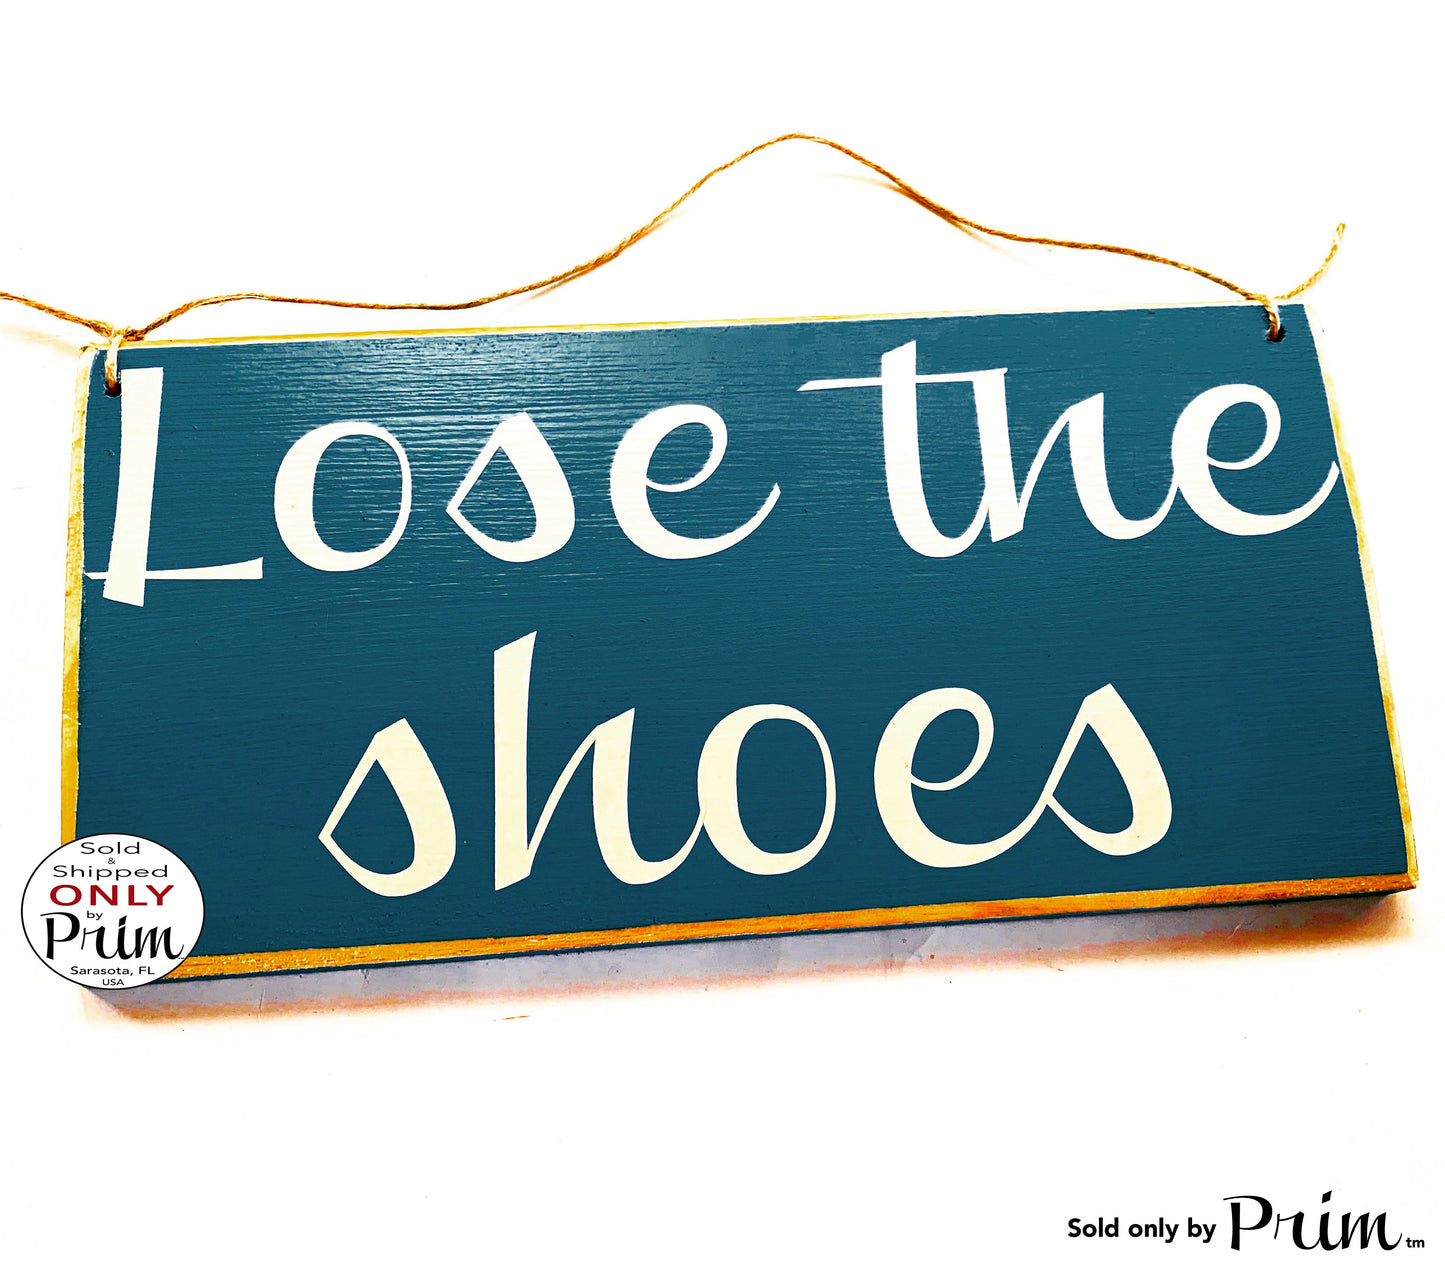 12x6 Lose The Shoes Custom Wood Sign Kindly Please Remove Your Shoes No Shoes Flip Flops Welcome Door Wall Plaque 